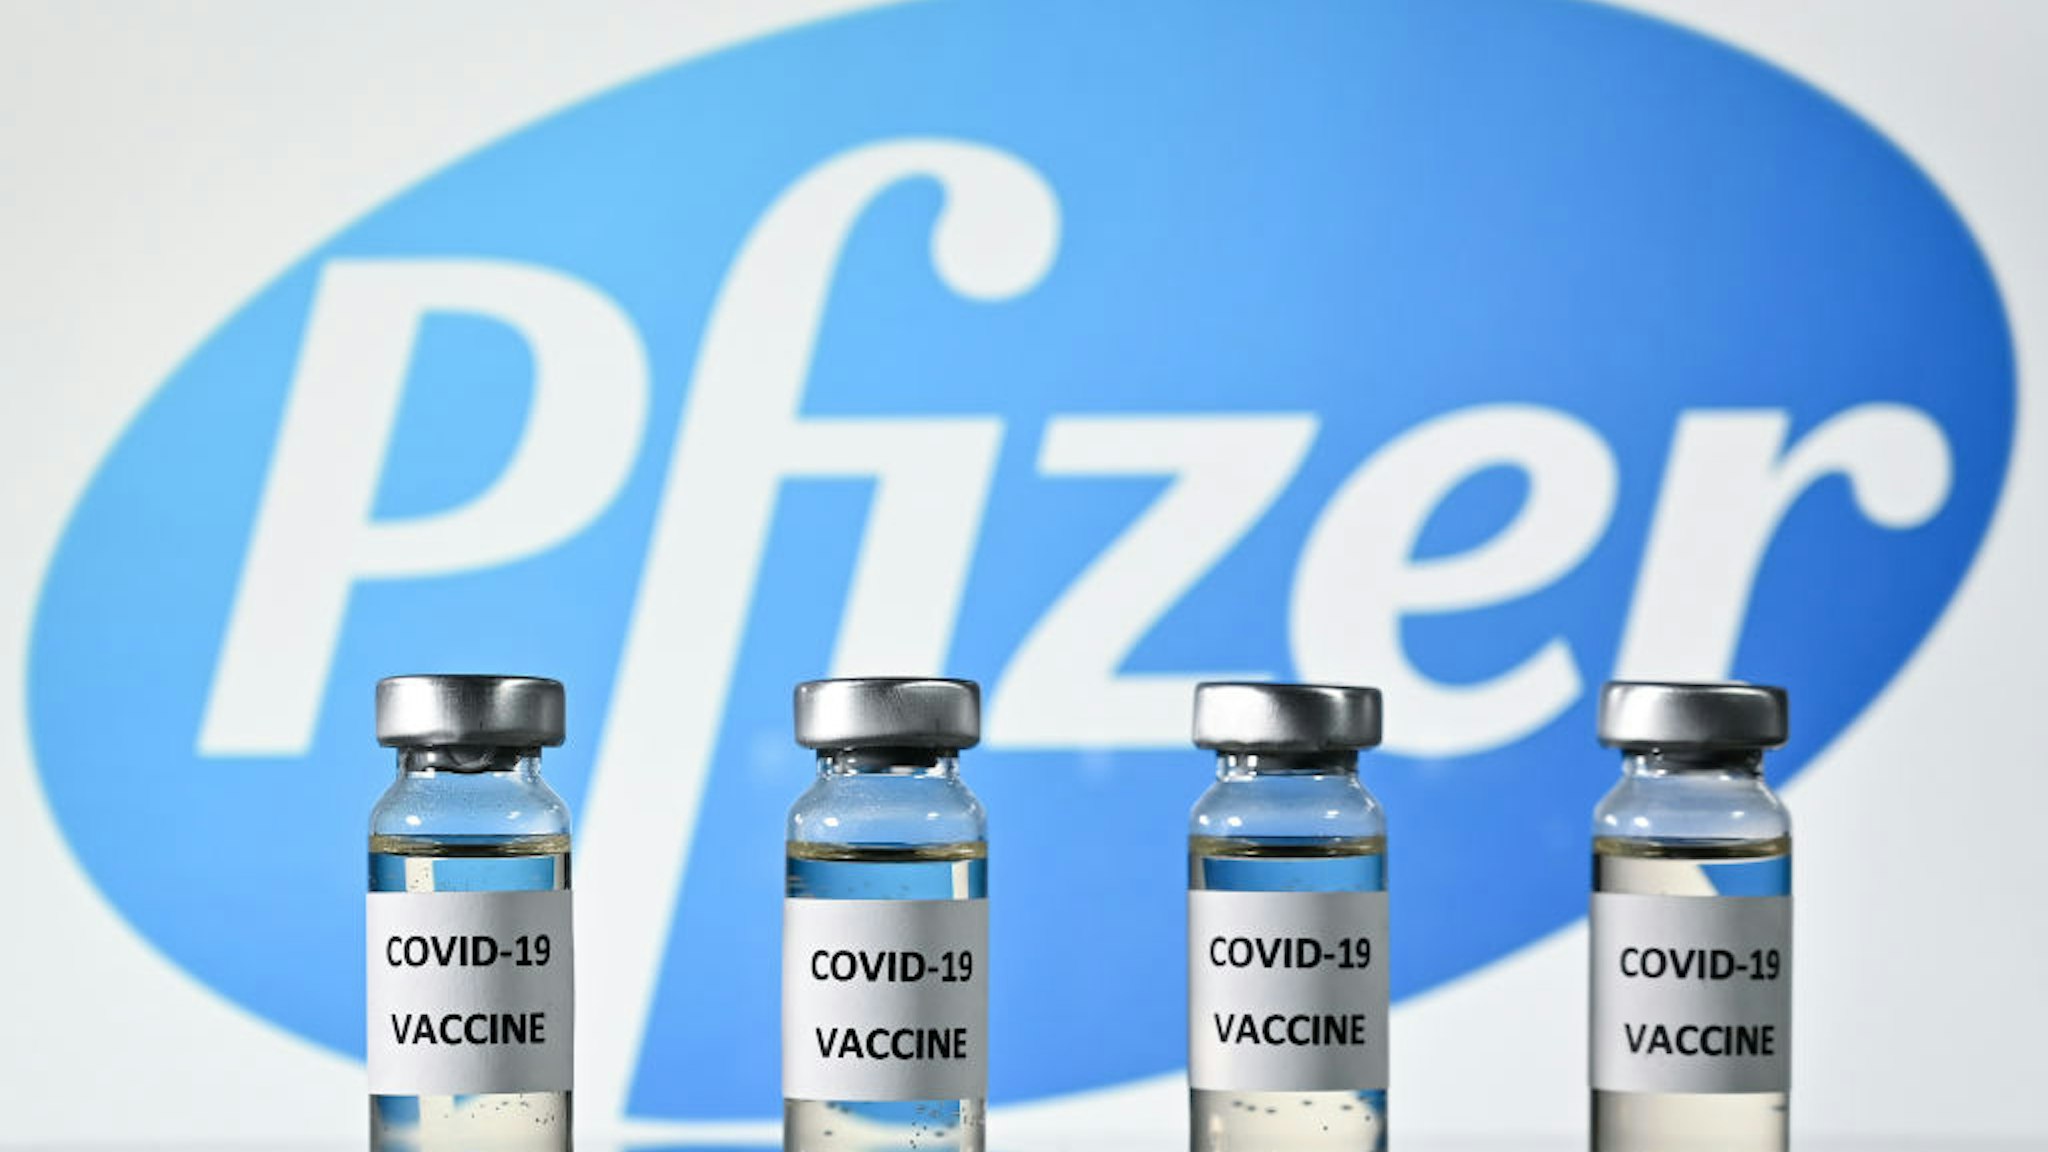 An illustration picture shows vials with Covid-19 Vaccine stickers attached, with the logo of US pharmaceutical company Pfizer, on November 17, 2020.